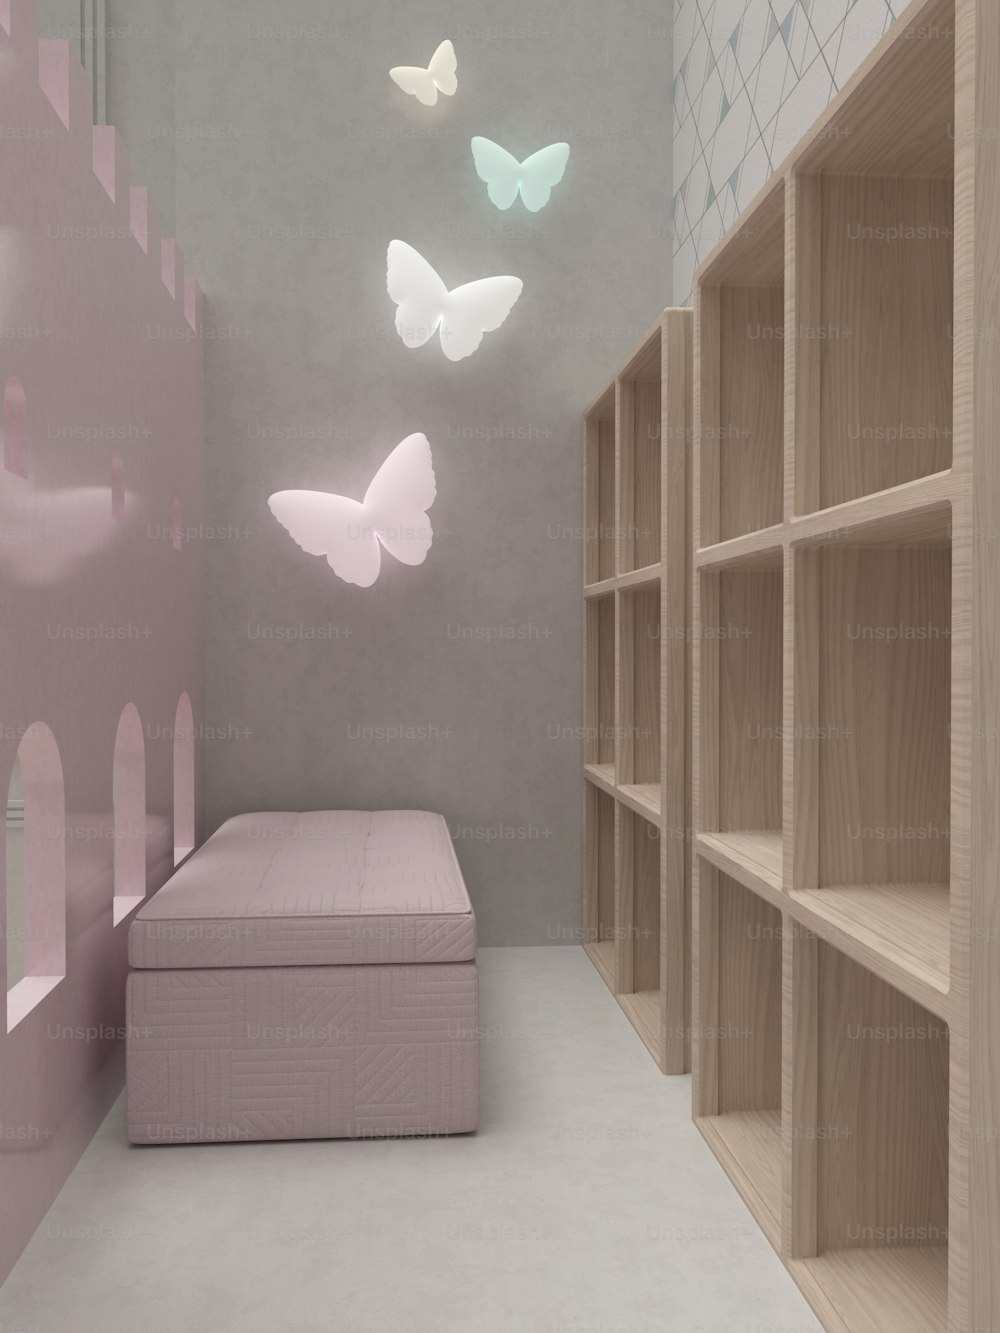 a room with a bed, shelves, and butterflies on the wall